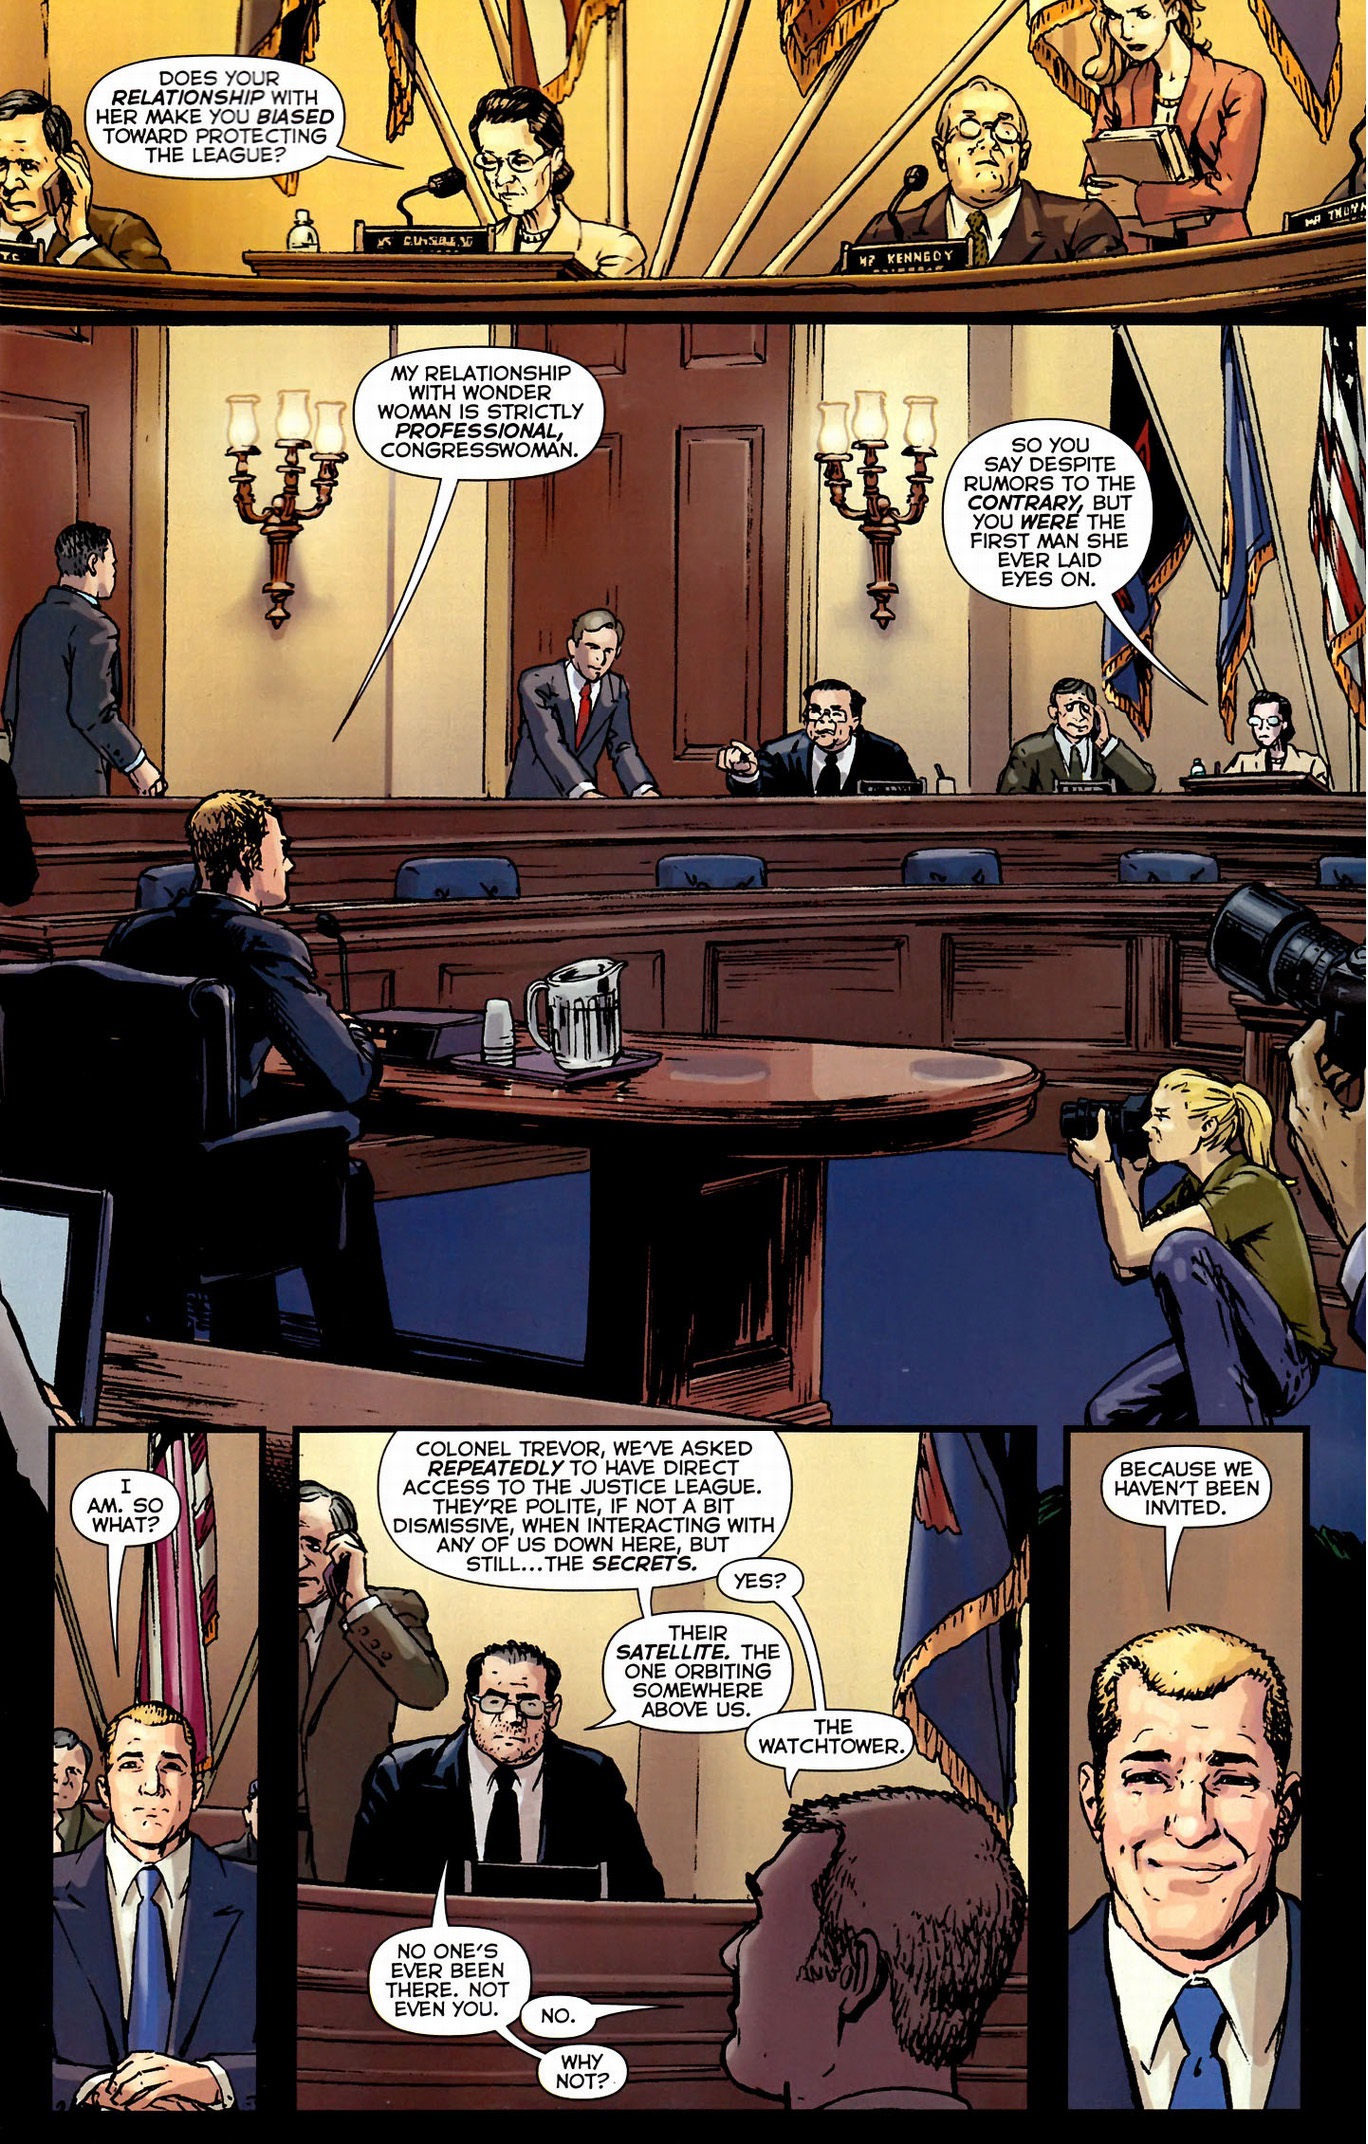 steve trevor defends the justice league from congress